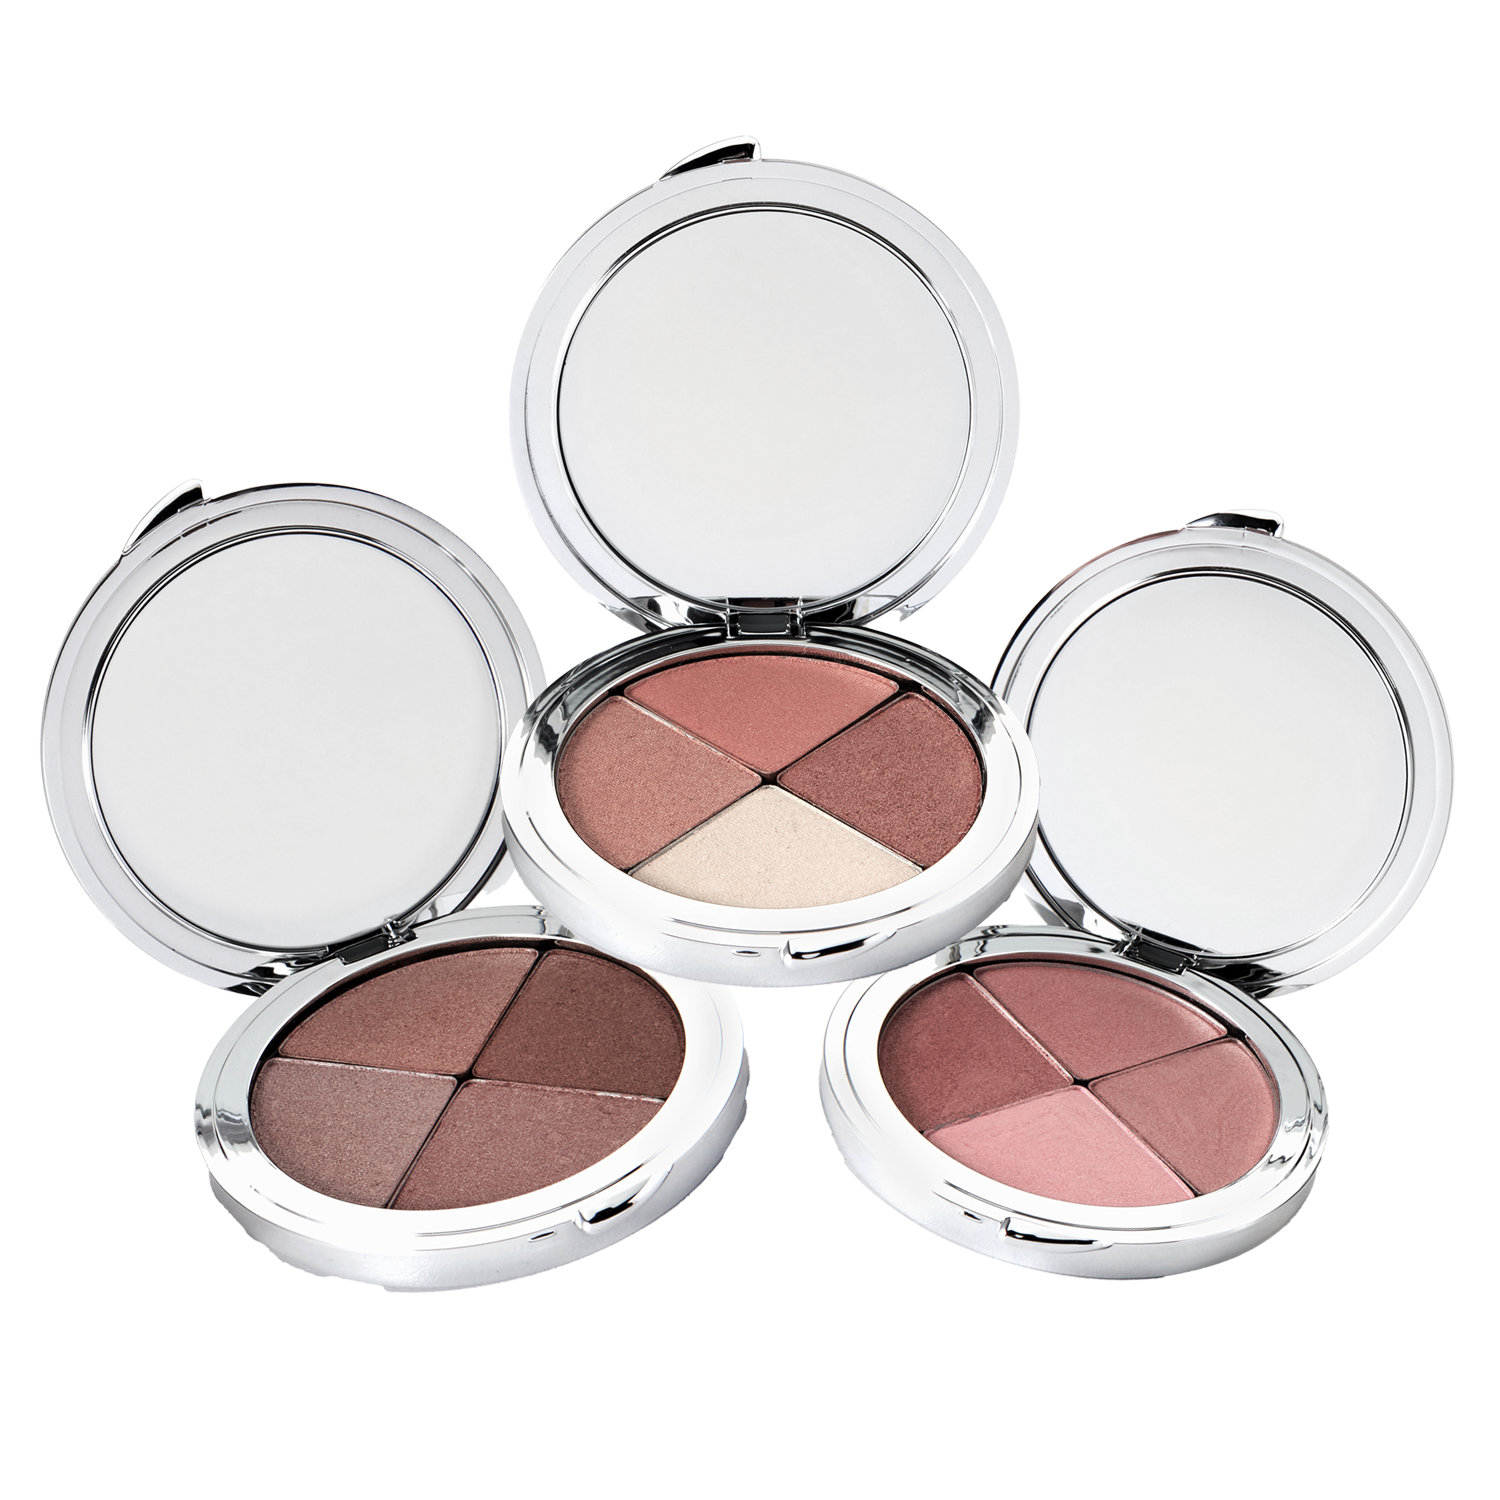 3 Compressed mineral compacts are shown open, exposing the 4 shades included in with each compact